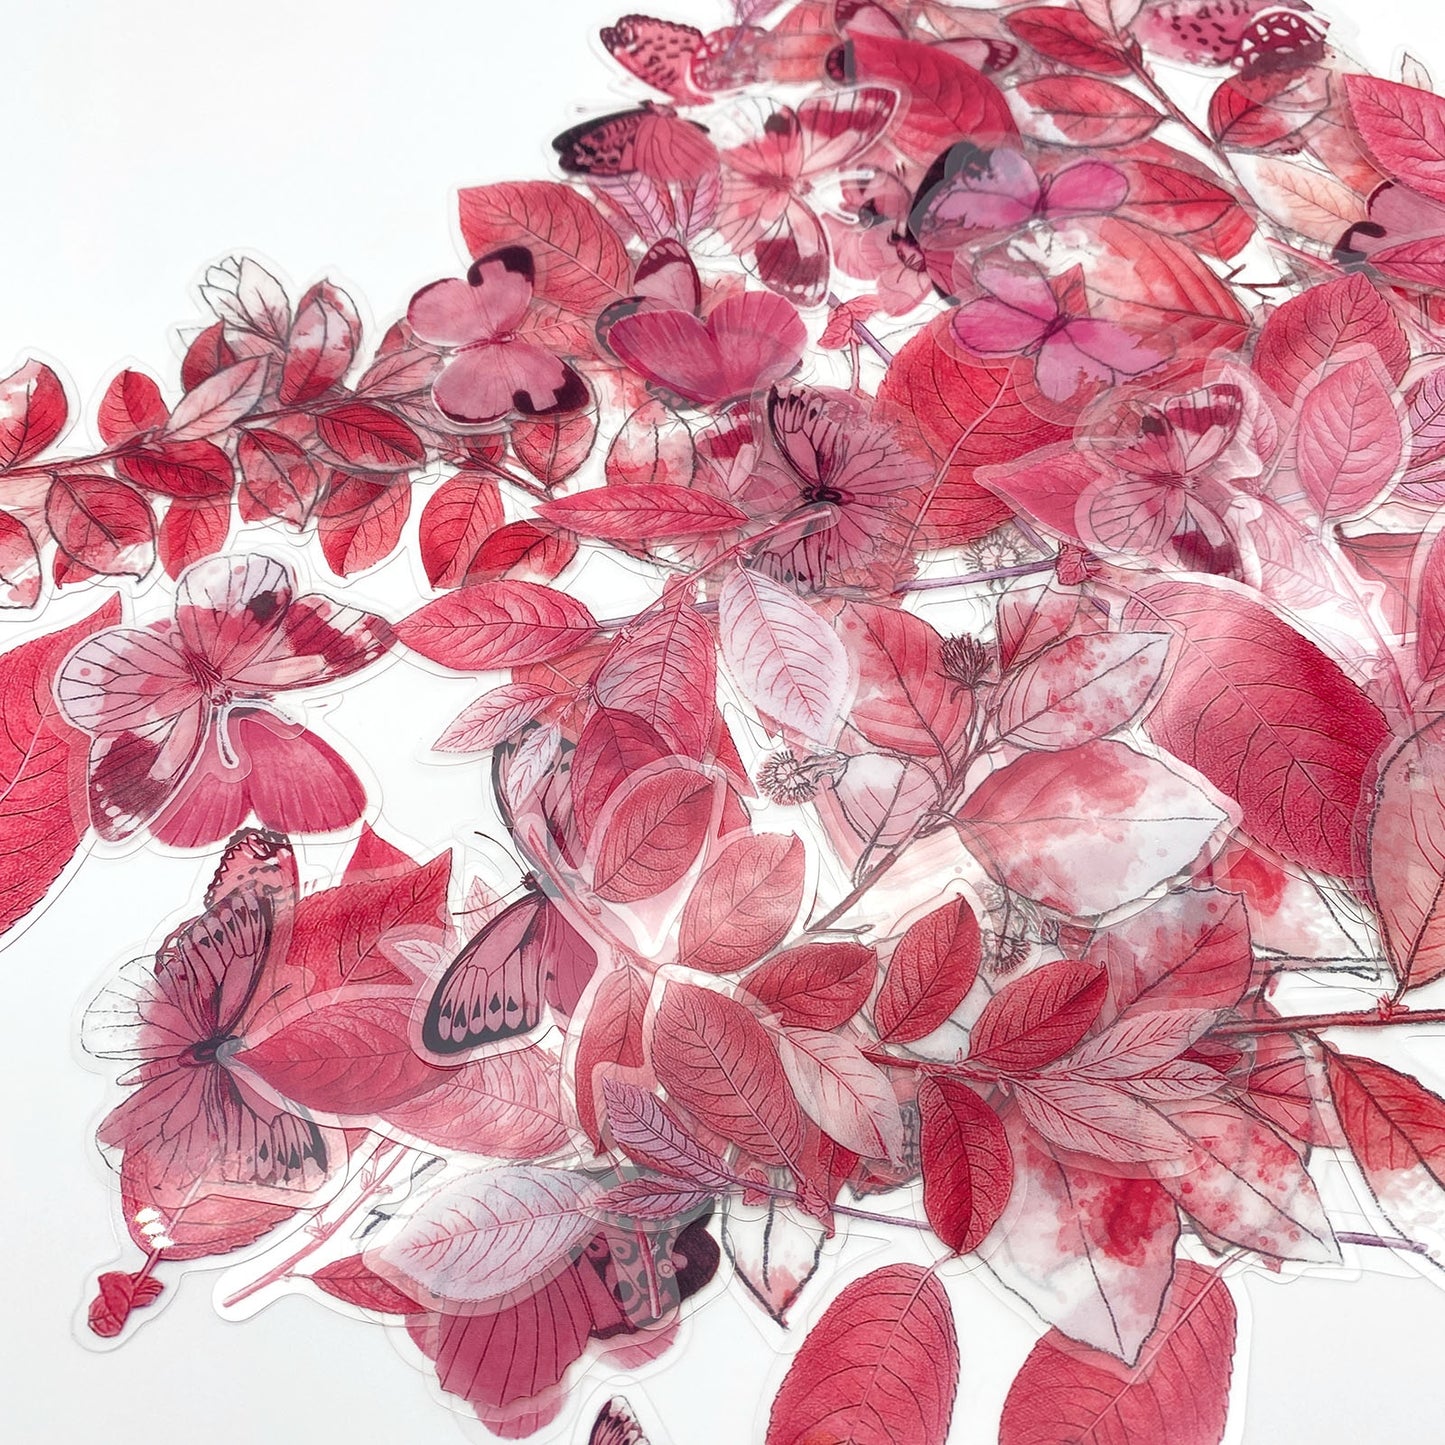 Pink acetate leaves for scrapbook (non archival)